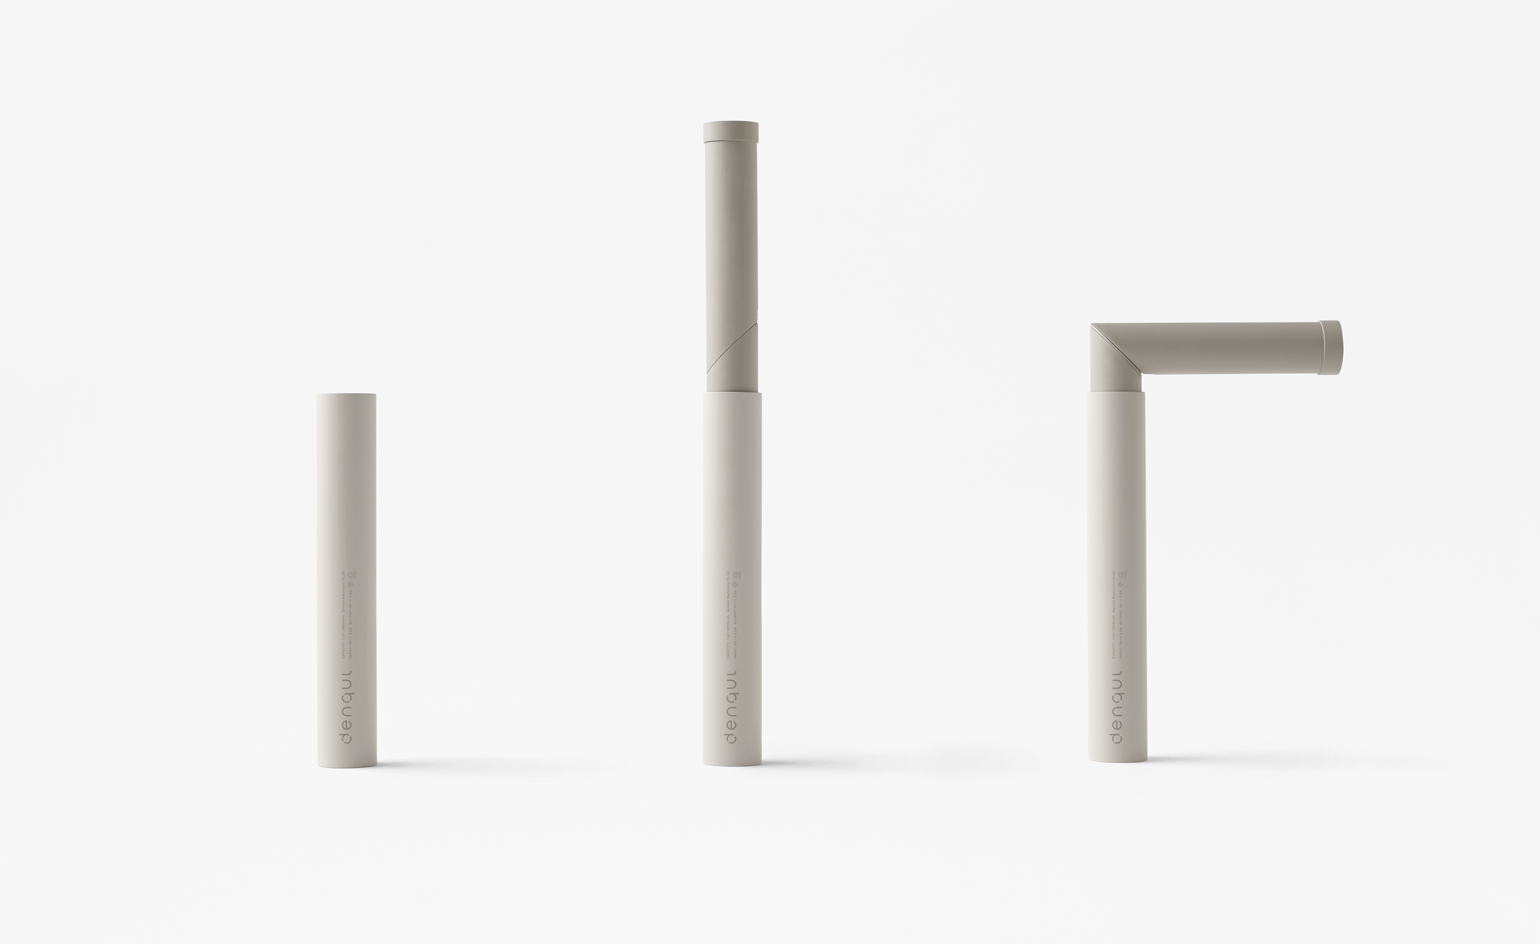 Denqul emergency phone charger, by Nendo for Sugita Ace, 2018